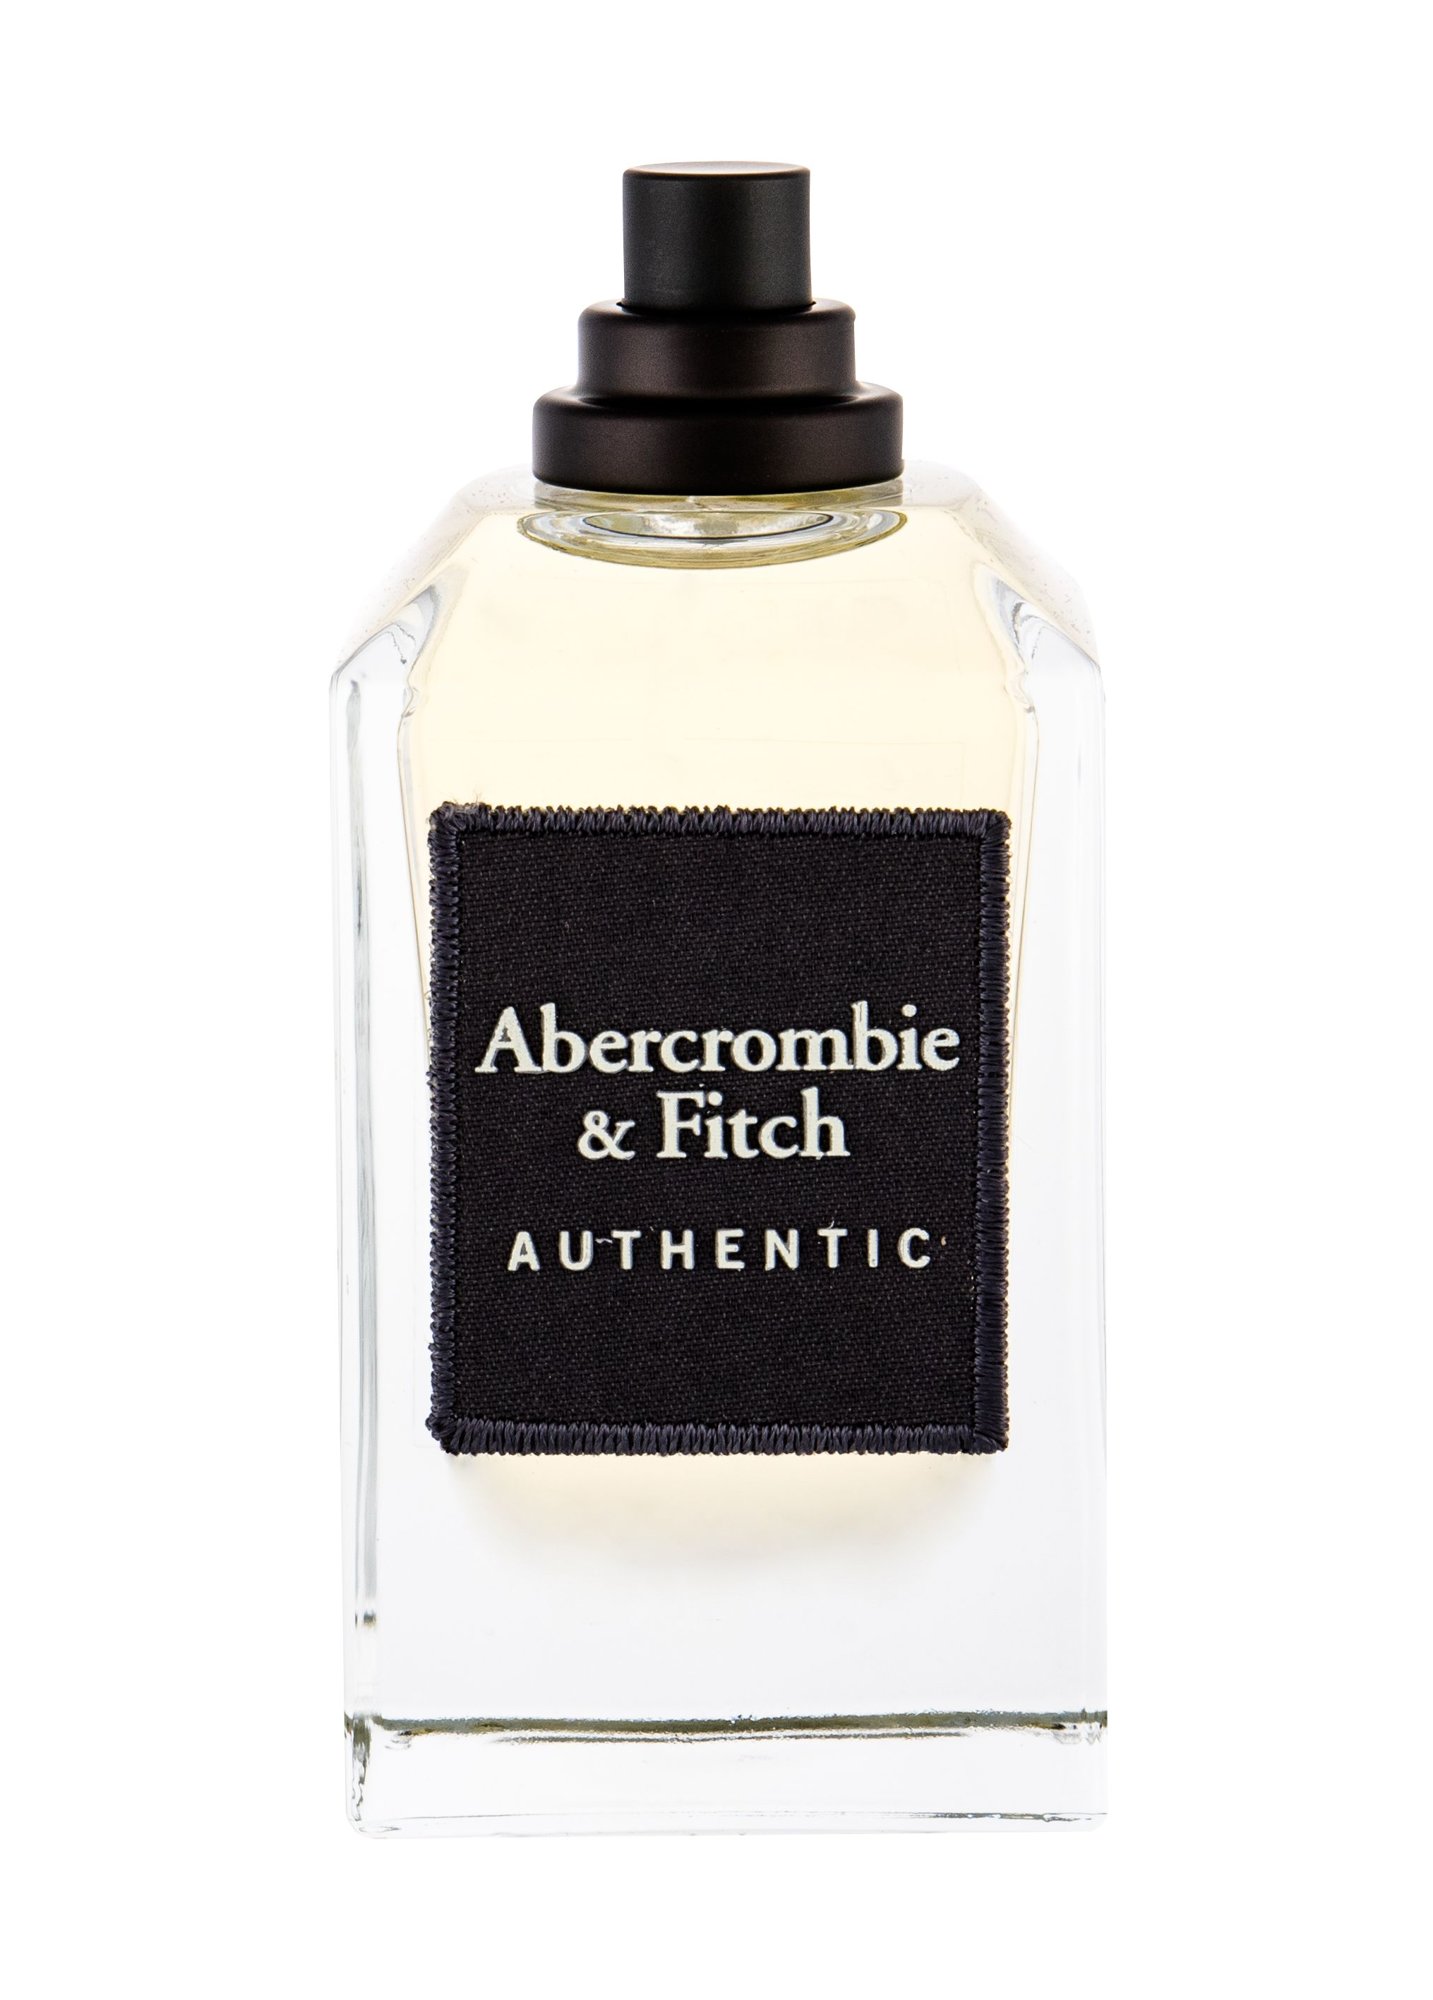 Abercrombie & Fitch Authentic Kvepalai Vyrams